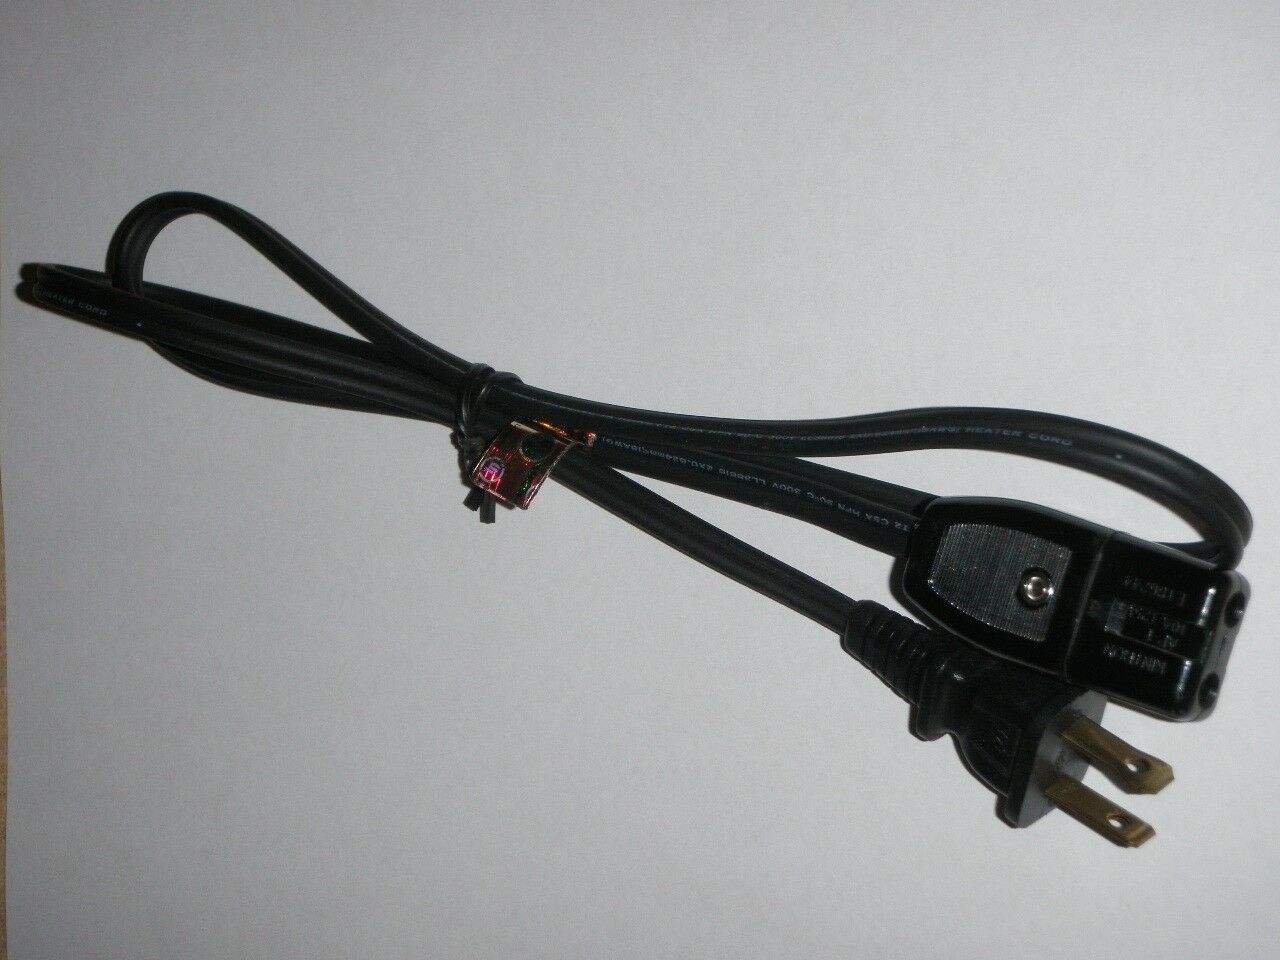 Power Cord for Cory Party Chef Electric Skillet Fry Pan Model DEC-3 2pin 36" 